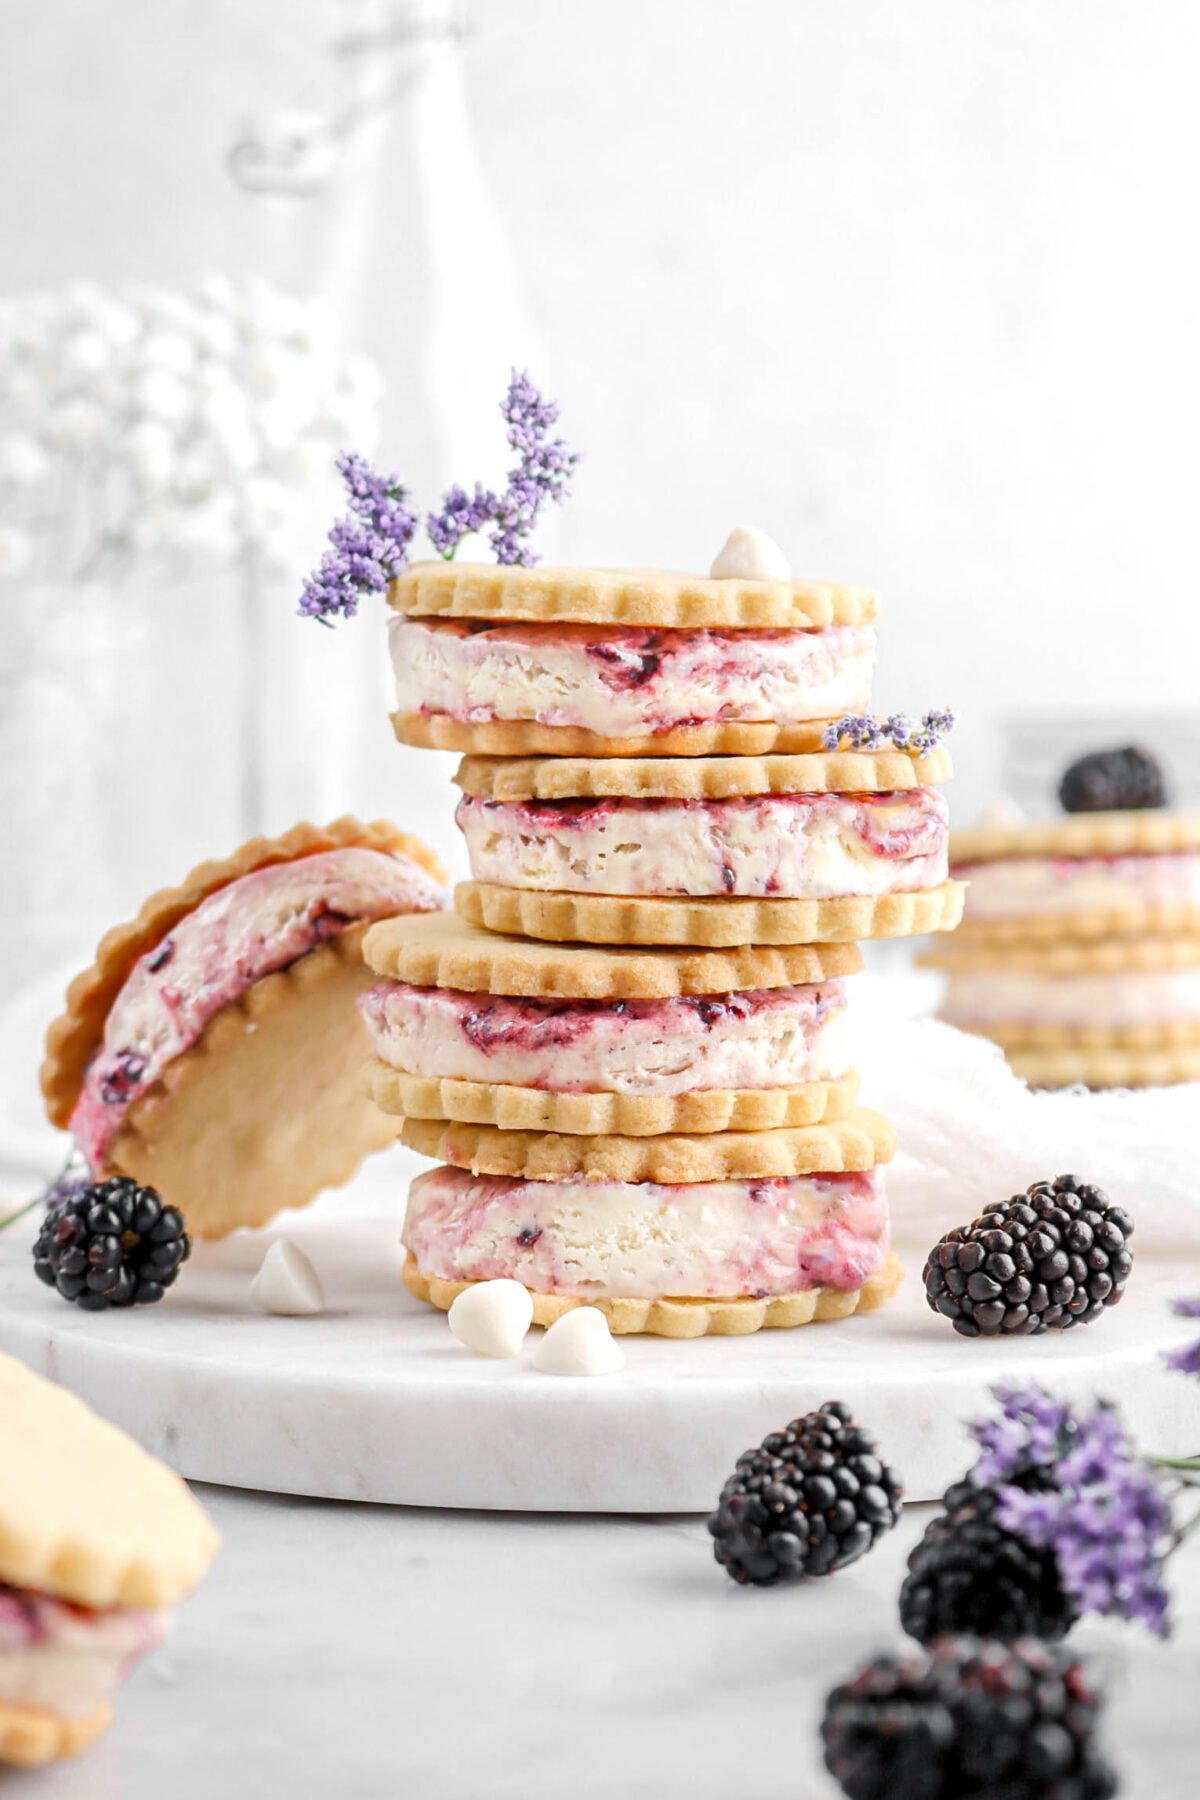 stacked ice cream sandwiches on marble plate with blackberries, white chocolate chips, and purple flowers around.